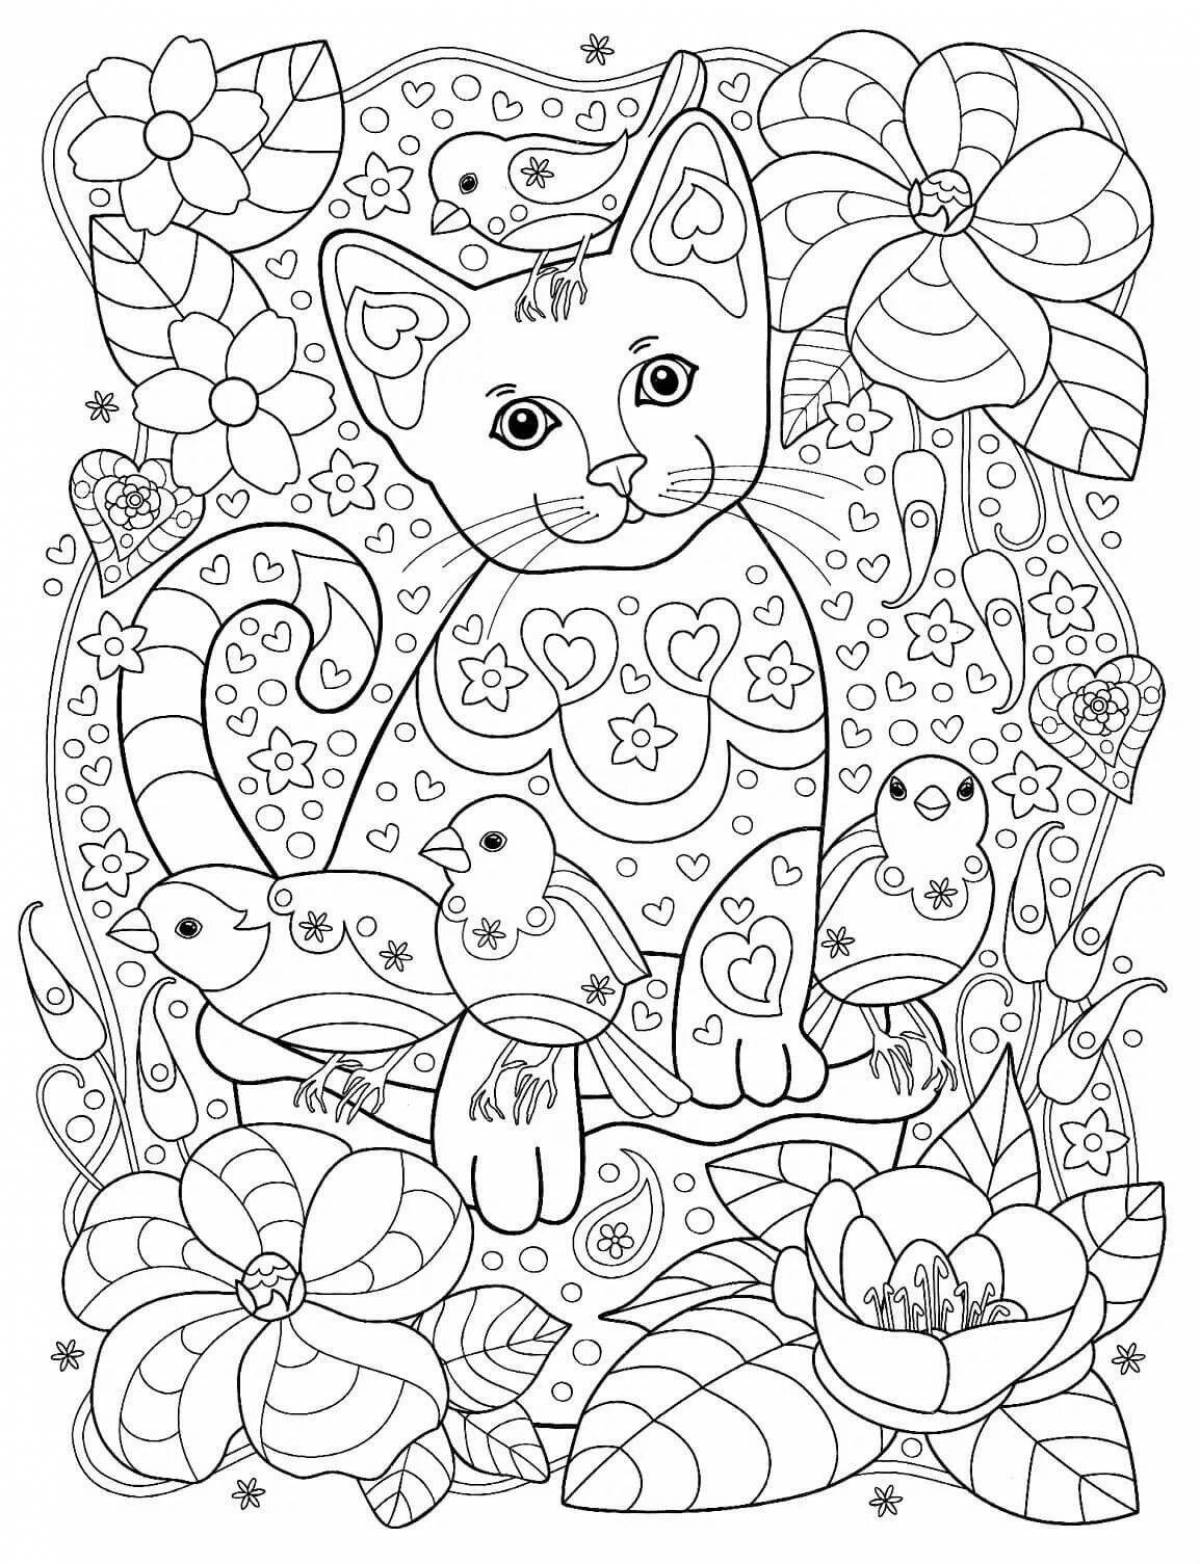 Bright anti-stress coloring book for children 8 years old